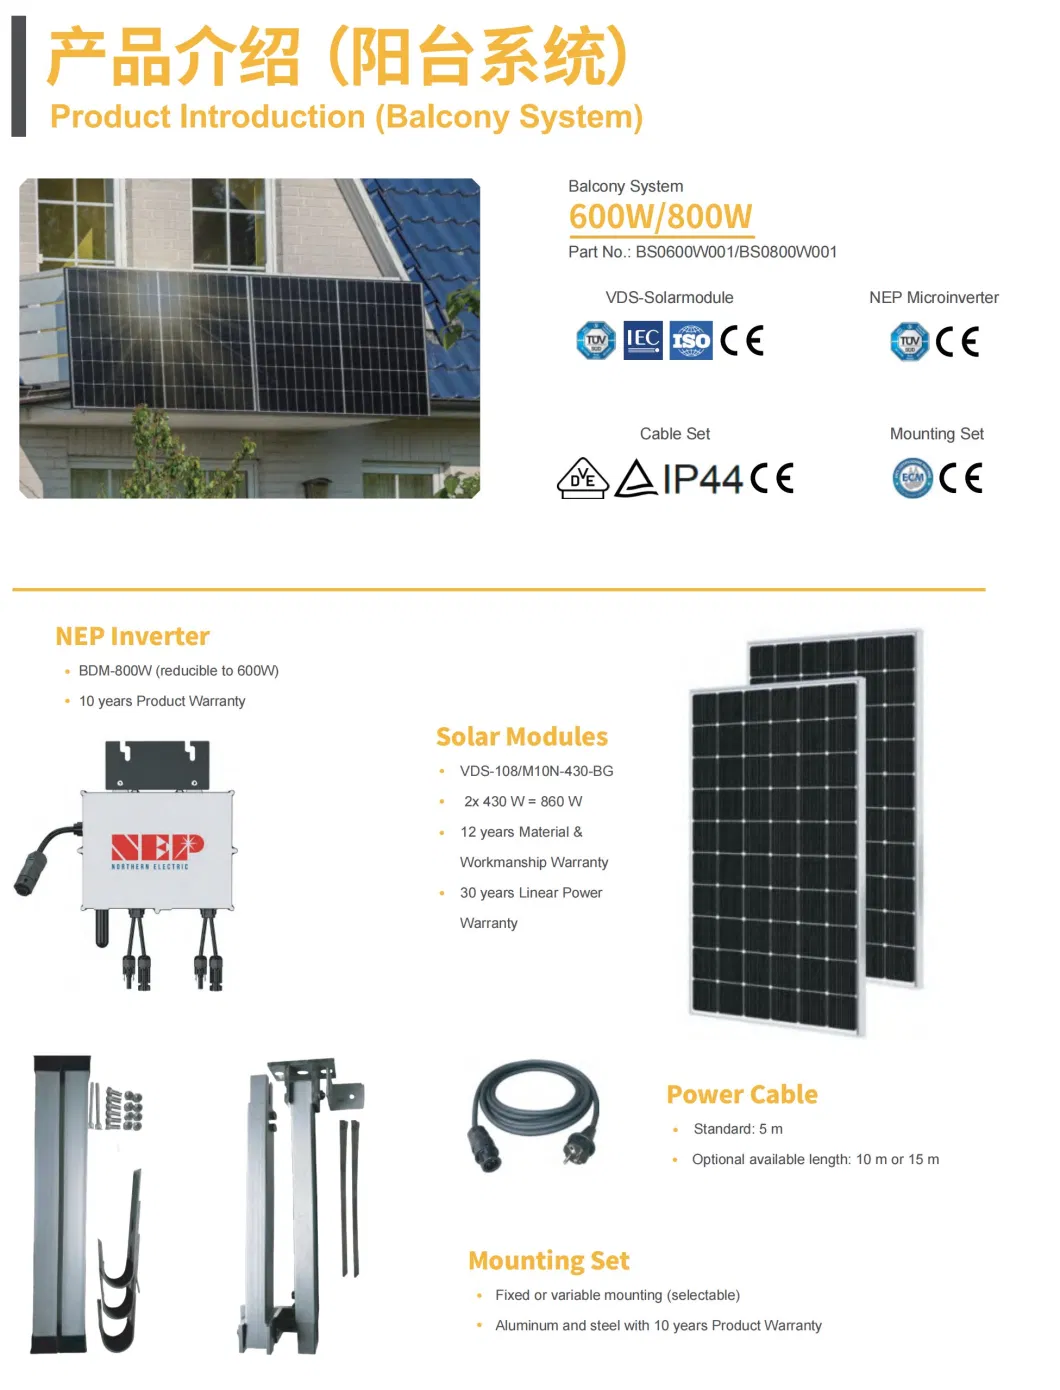 Complete Home Solar Power System Solar Kit on Grid with Micro Inverter and Solar Panel Adjustable Mounting Brackets